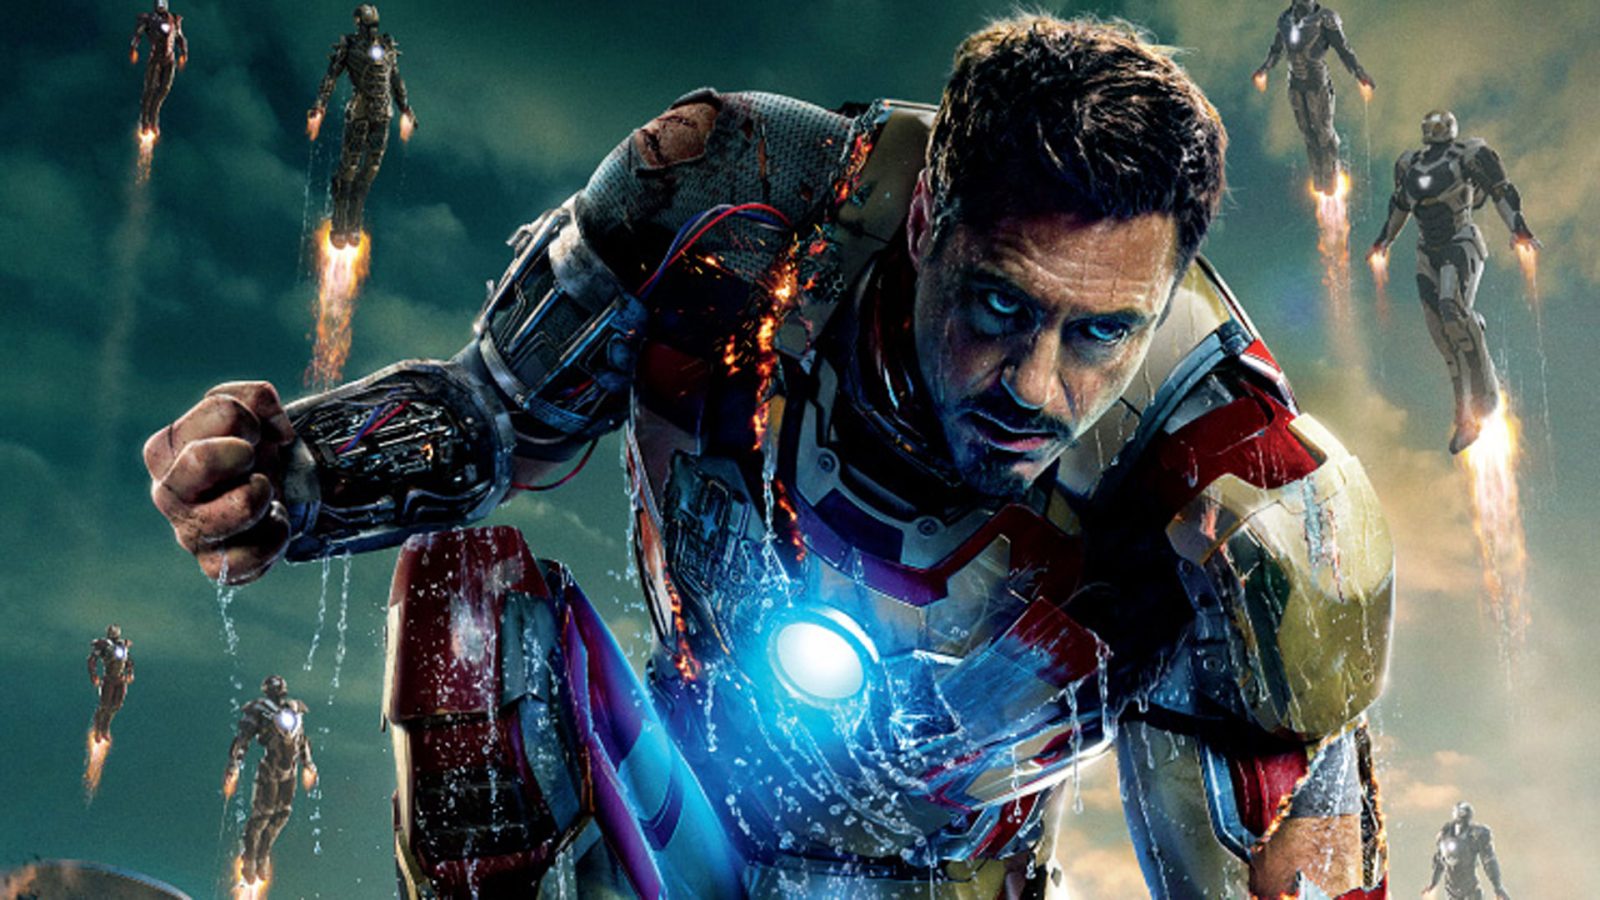 iron man 4 release date